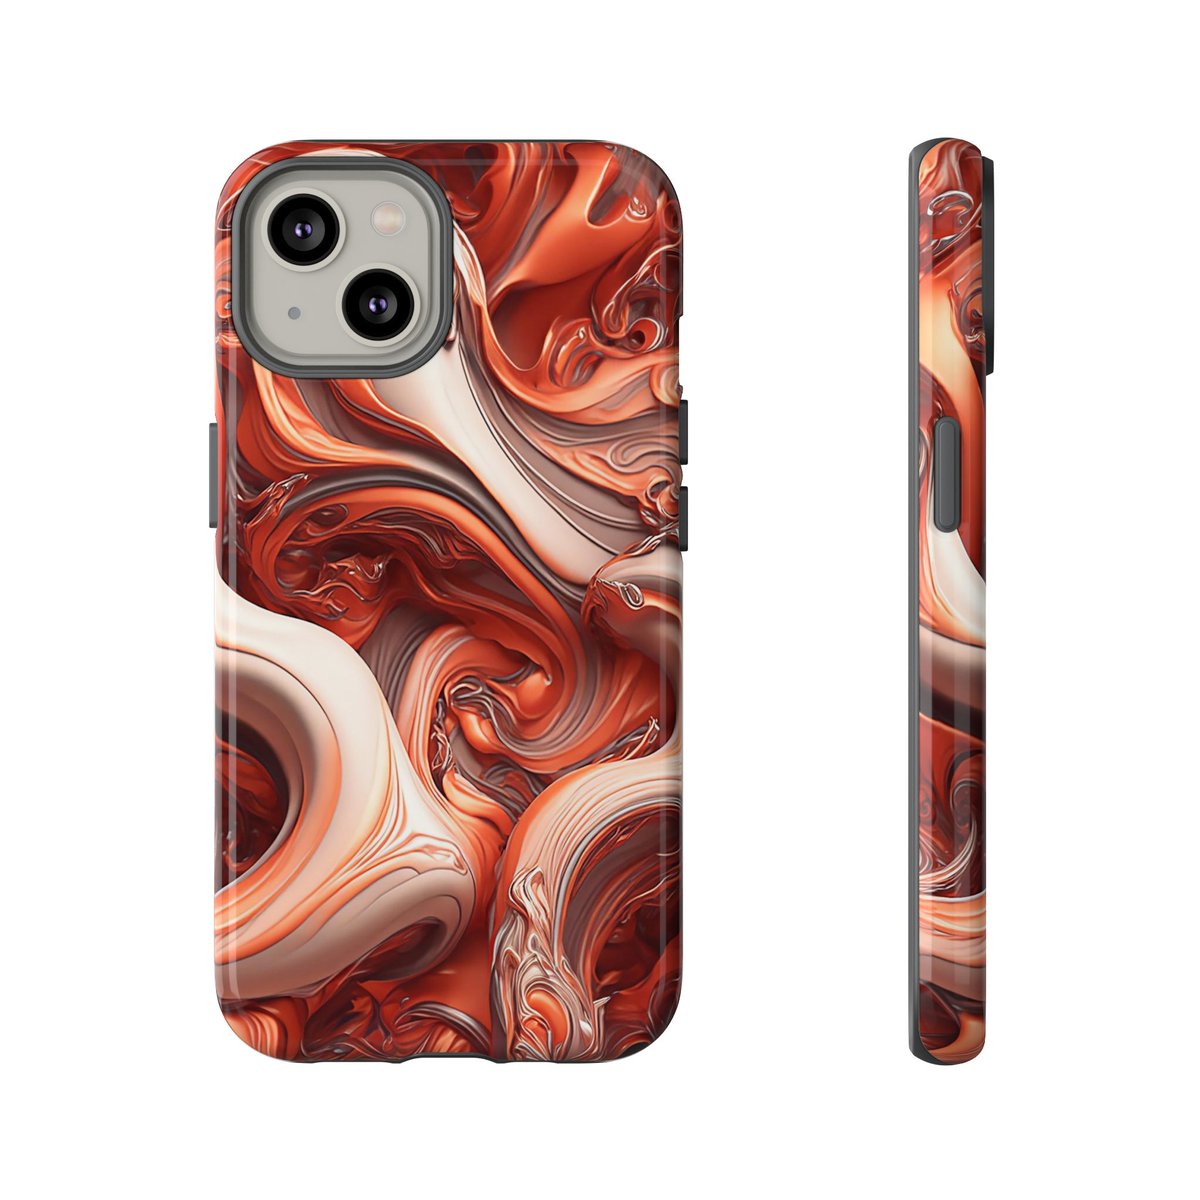 Excited to share the latest addition to my #etsy shop: Peach and Coral Swirls Tough Phone Case etsy.me/44uFuN6 #no #swirl #abstractswirls #toughcase #peachphonecase #funkydesign #coralphonecase #googlepixel #samsunggalaxy